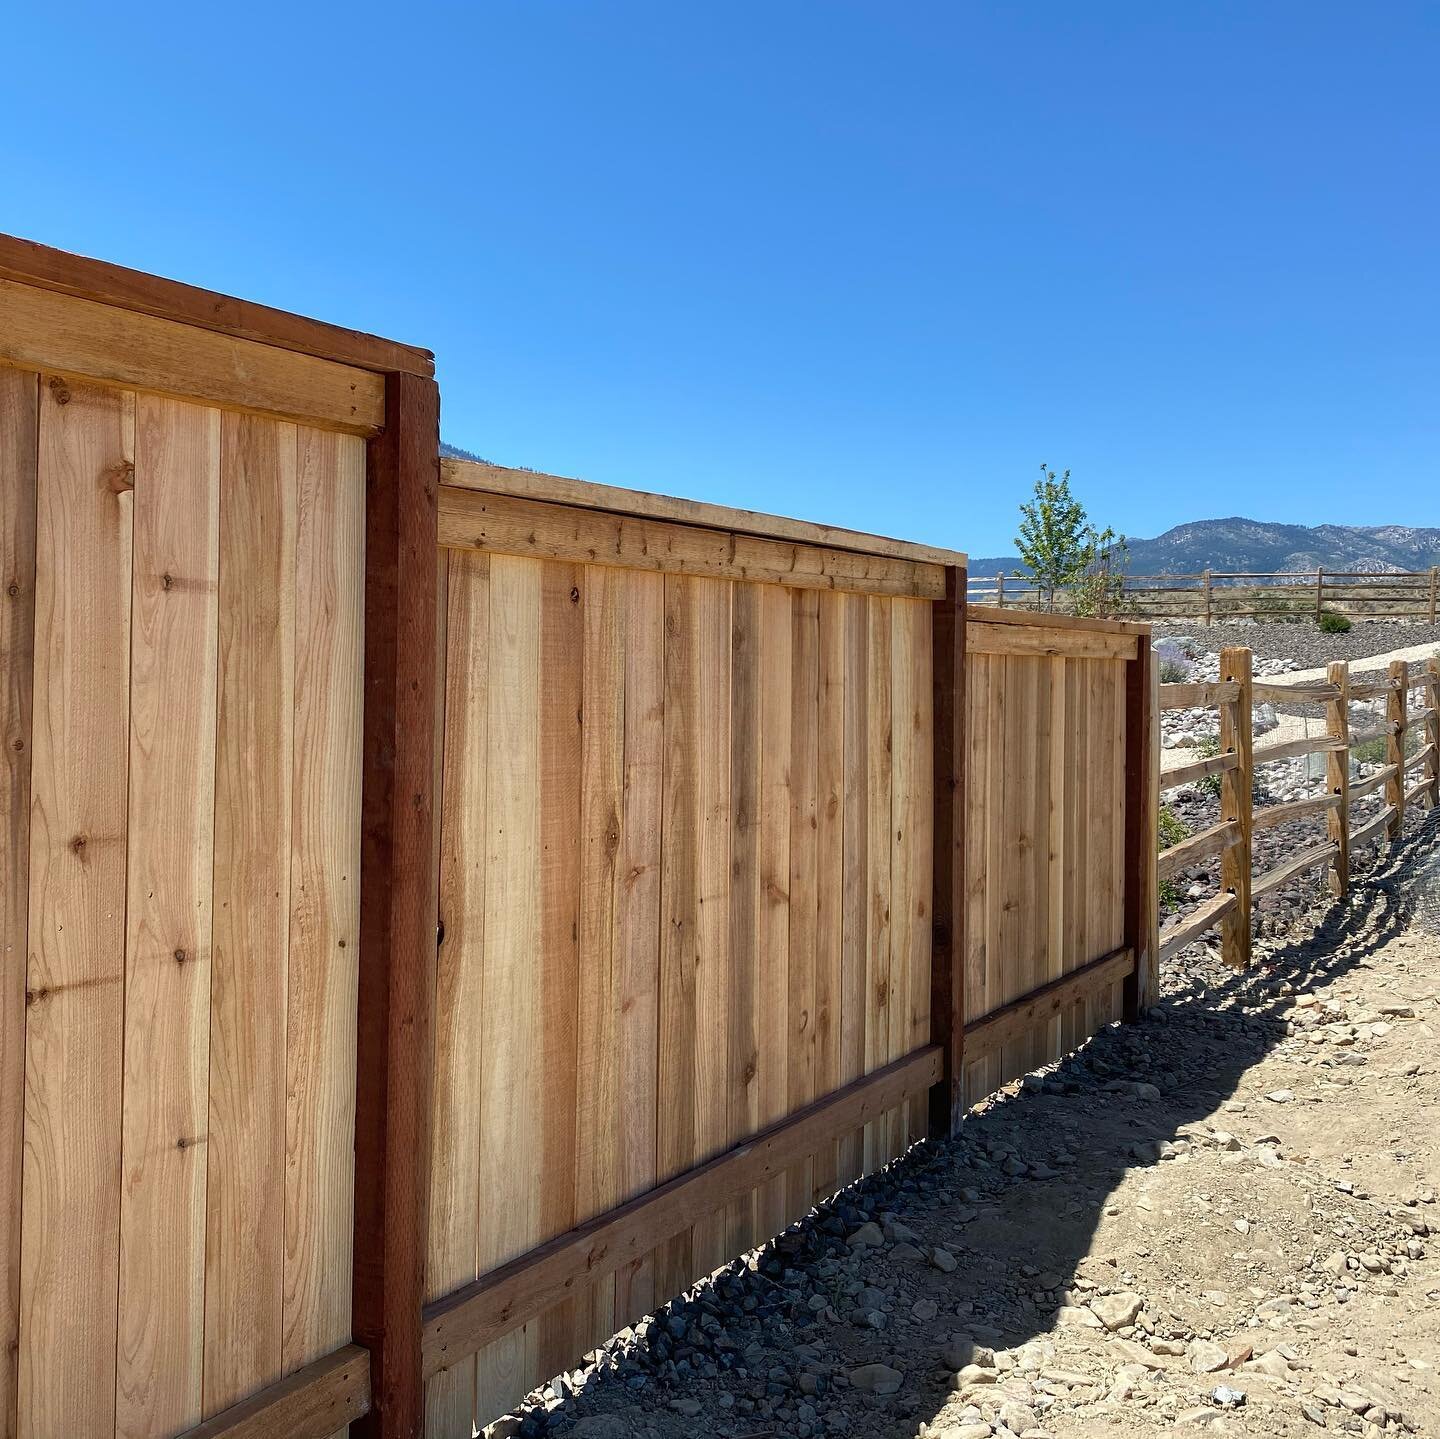 C &bull; E &bull; D &bull; A &bull; R 🍂🌾🍁Capped picture frame fence stepped down to the 4 rail split cedar fence. 

Attached is a welded wire to keep your furry friends inside, and the unwanted ones out! 🐻🦌🐎🐿🐺

#nevadafence #builttolast #wire